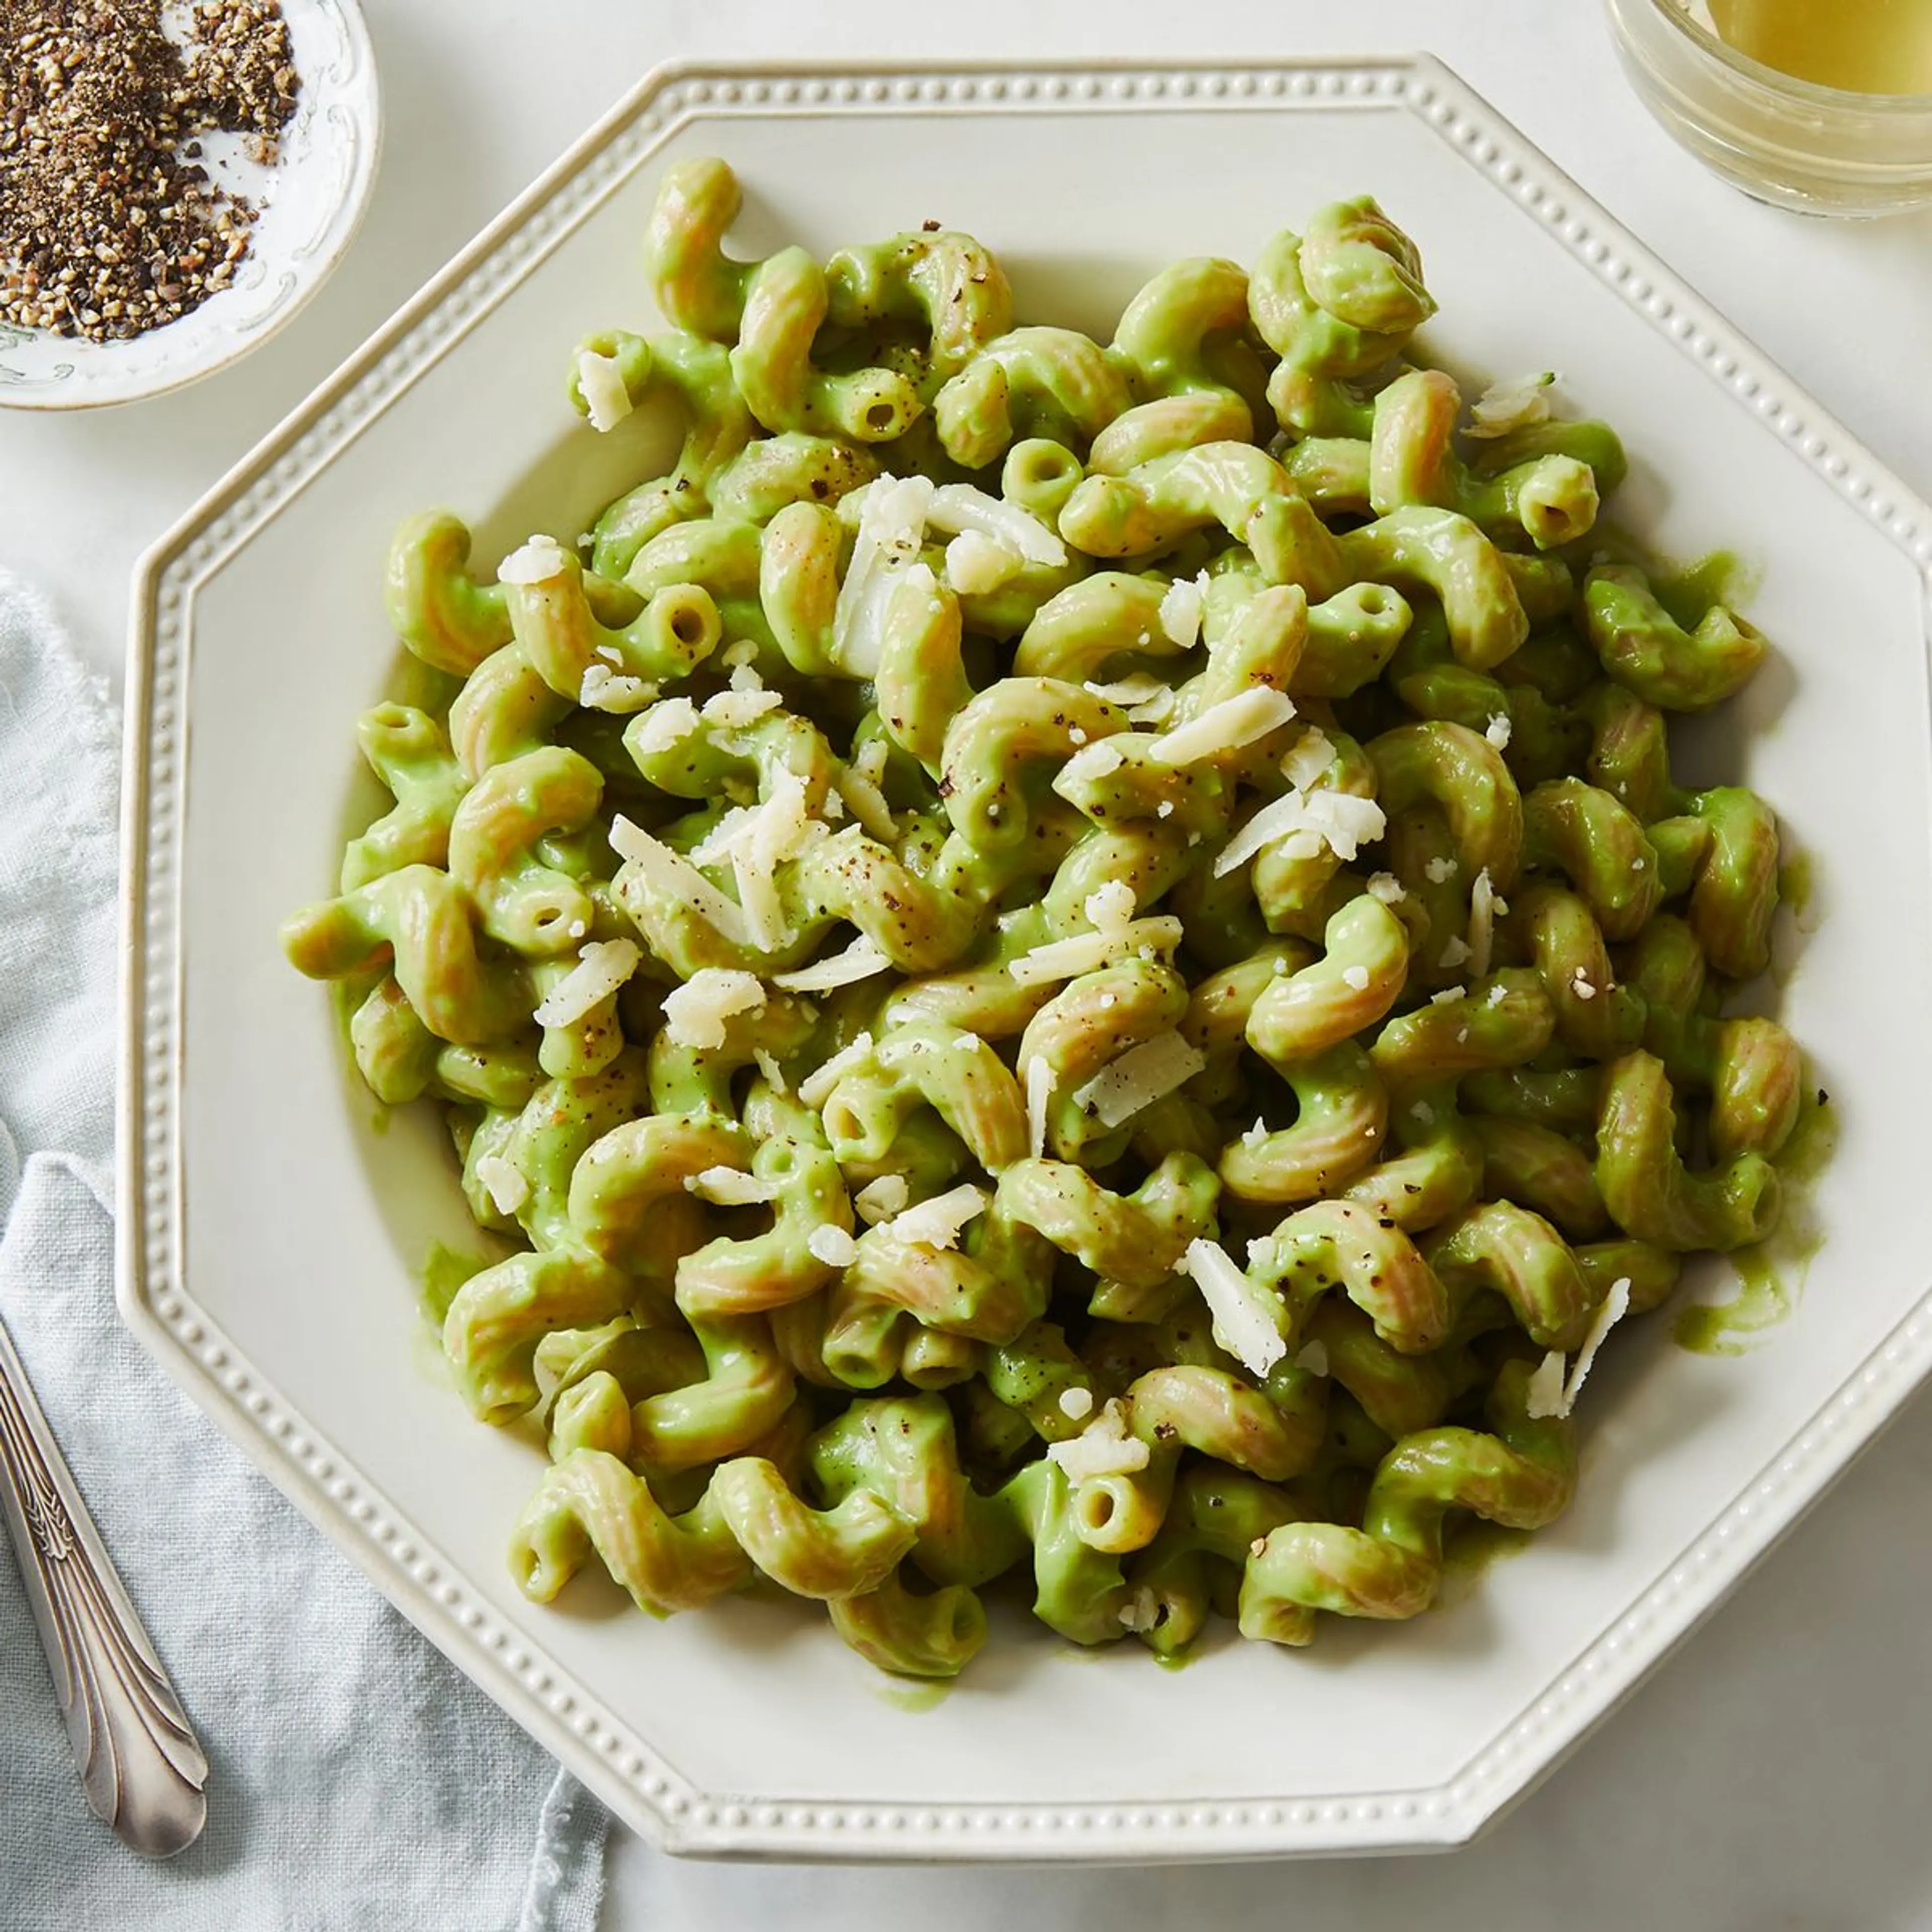 Pasta With Broccoli-Cheddar Sauce